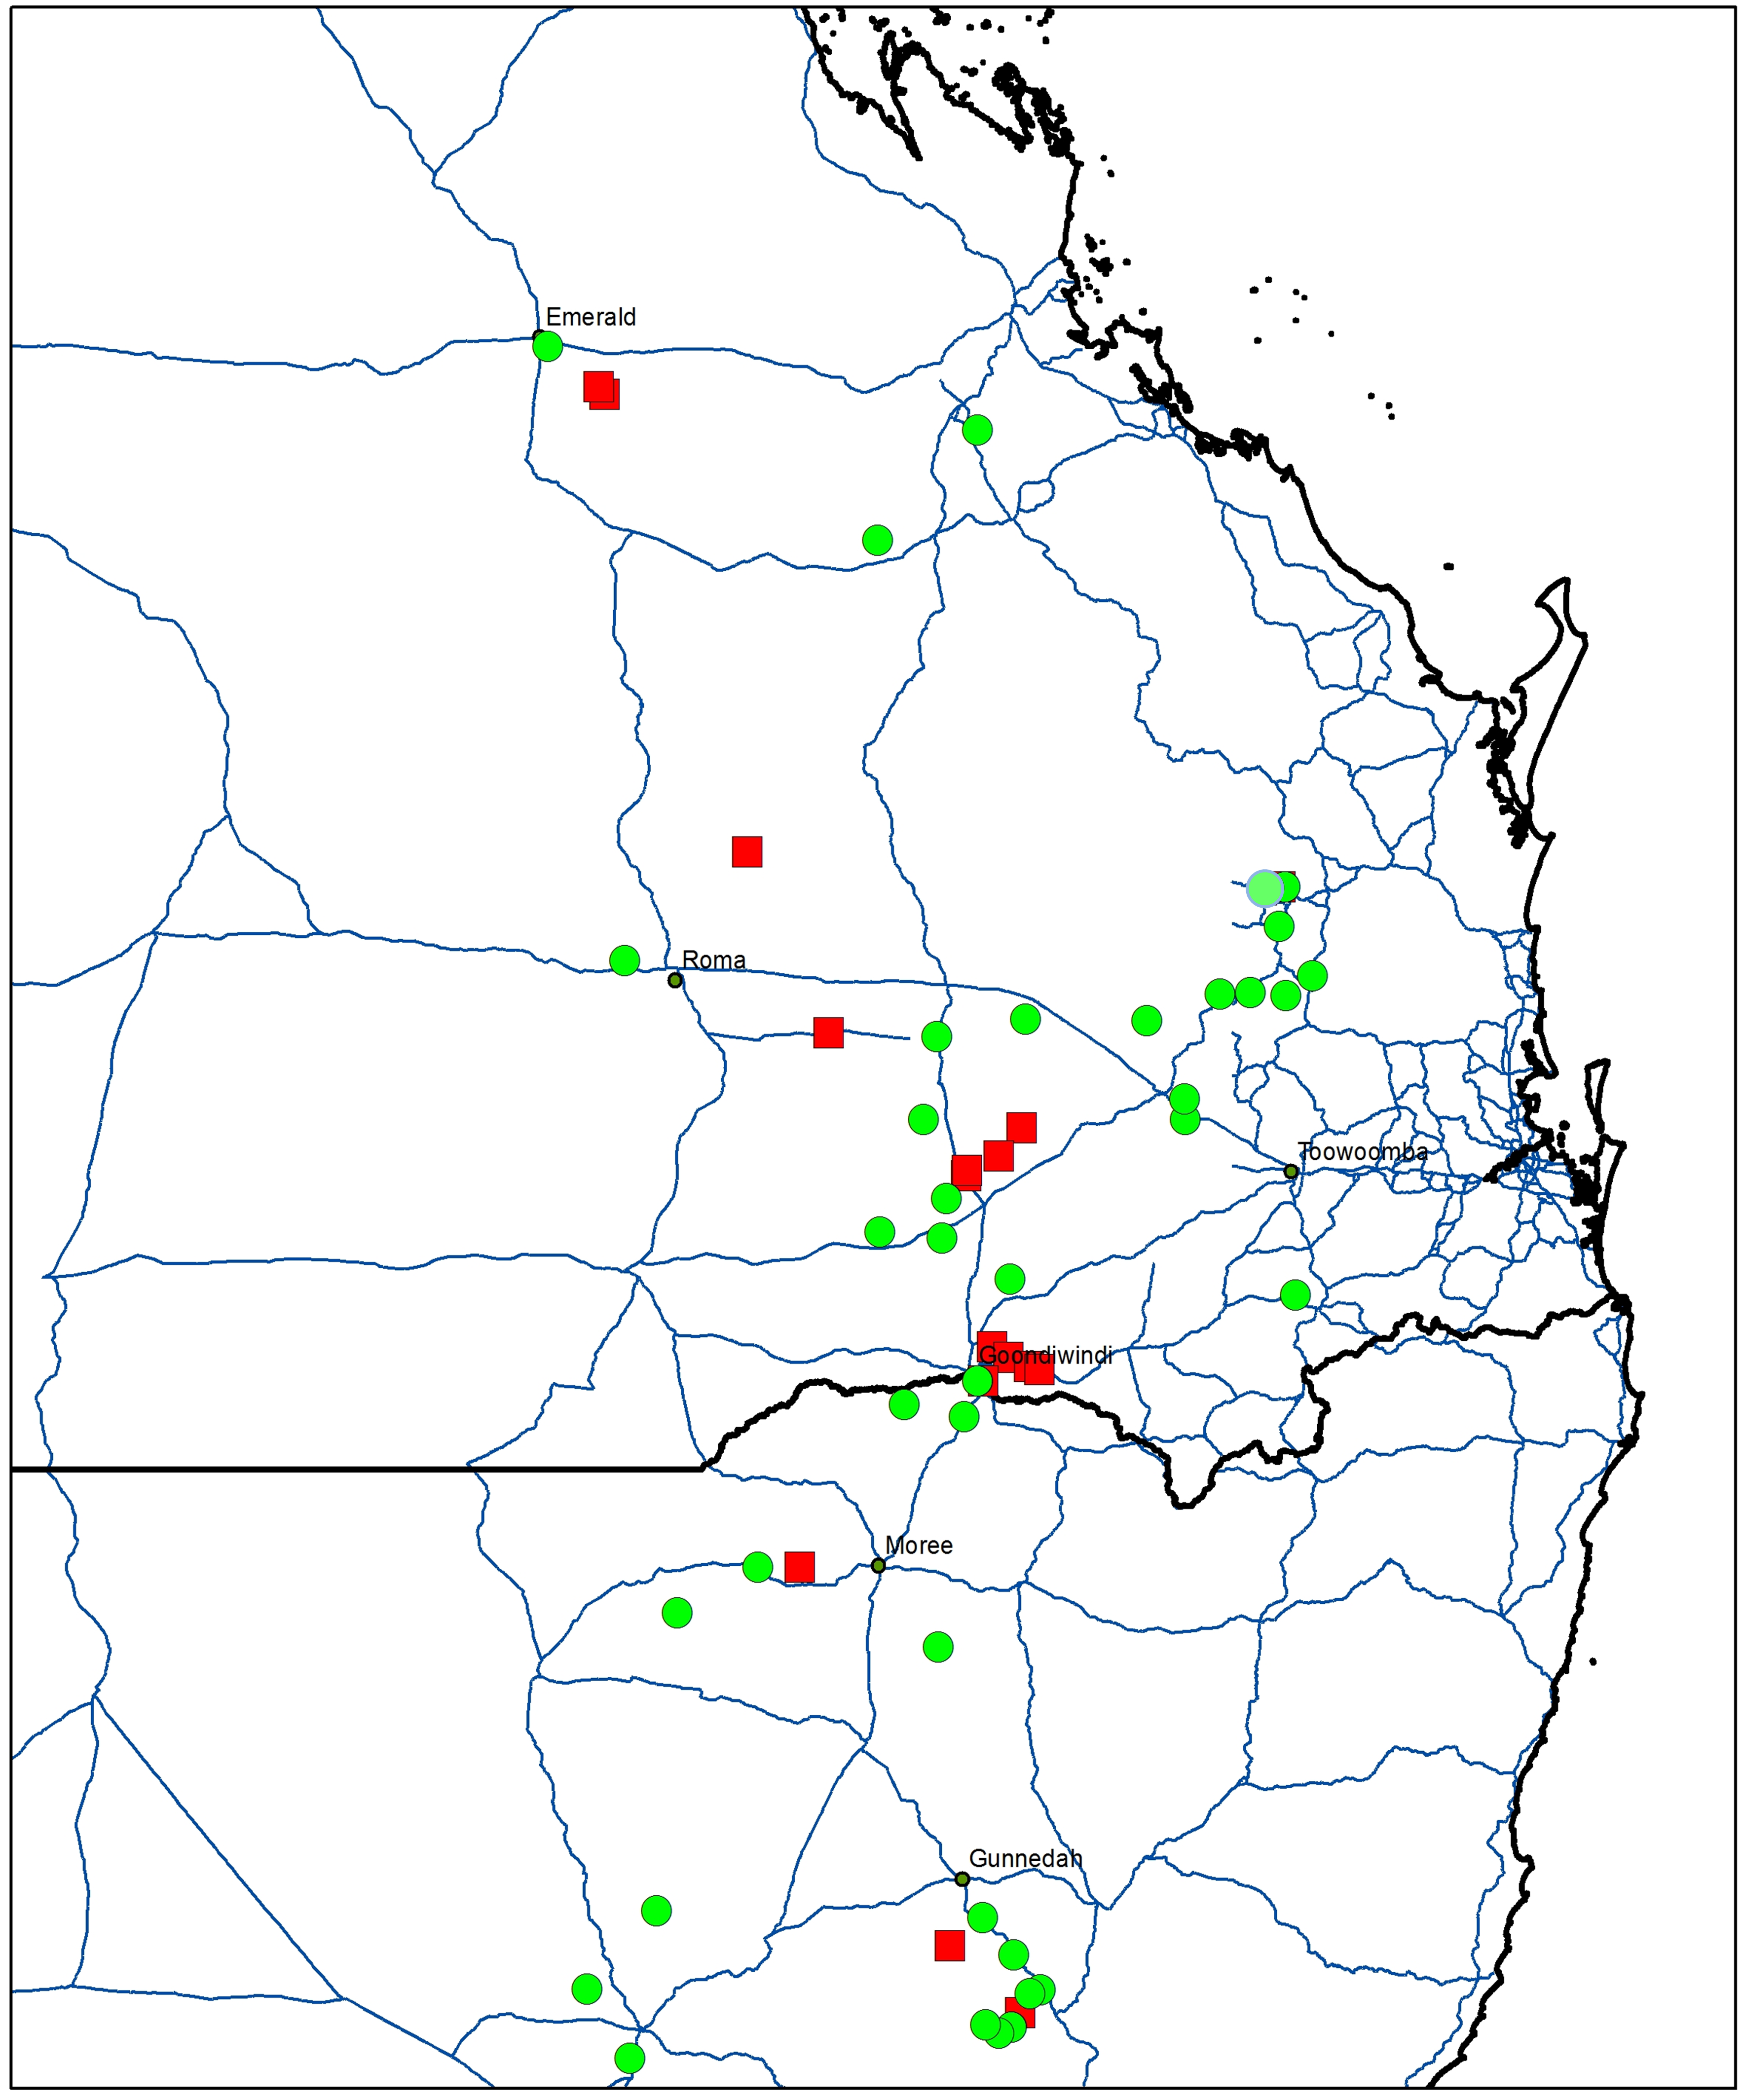 This map shows the distribution of glyphosate resistant and susceptible awnless barnyard grass populations across the northern grain cropping region. Red squares represent glyphosate resistant populations while green circles represent susceptible populations.